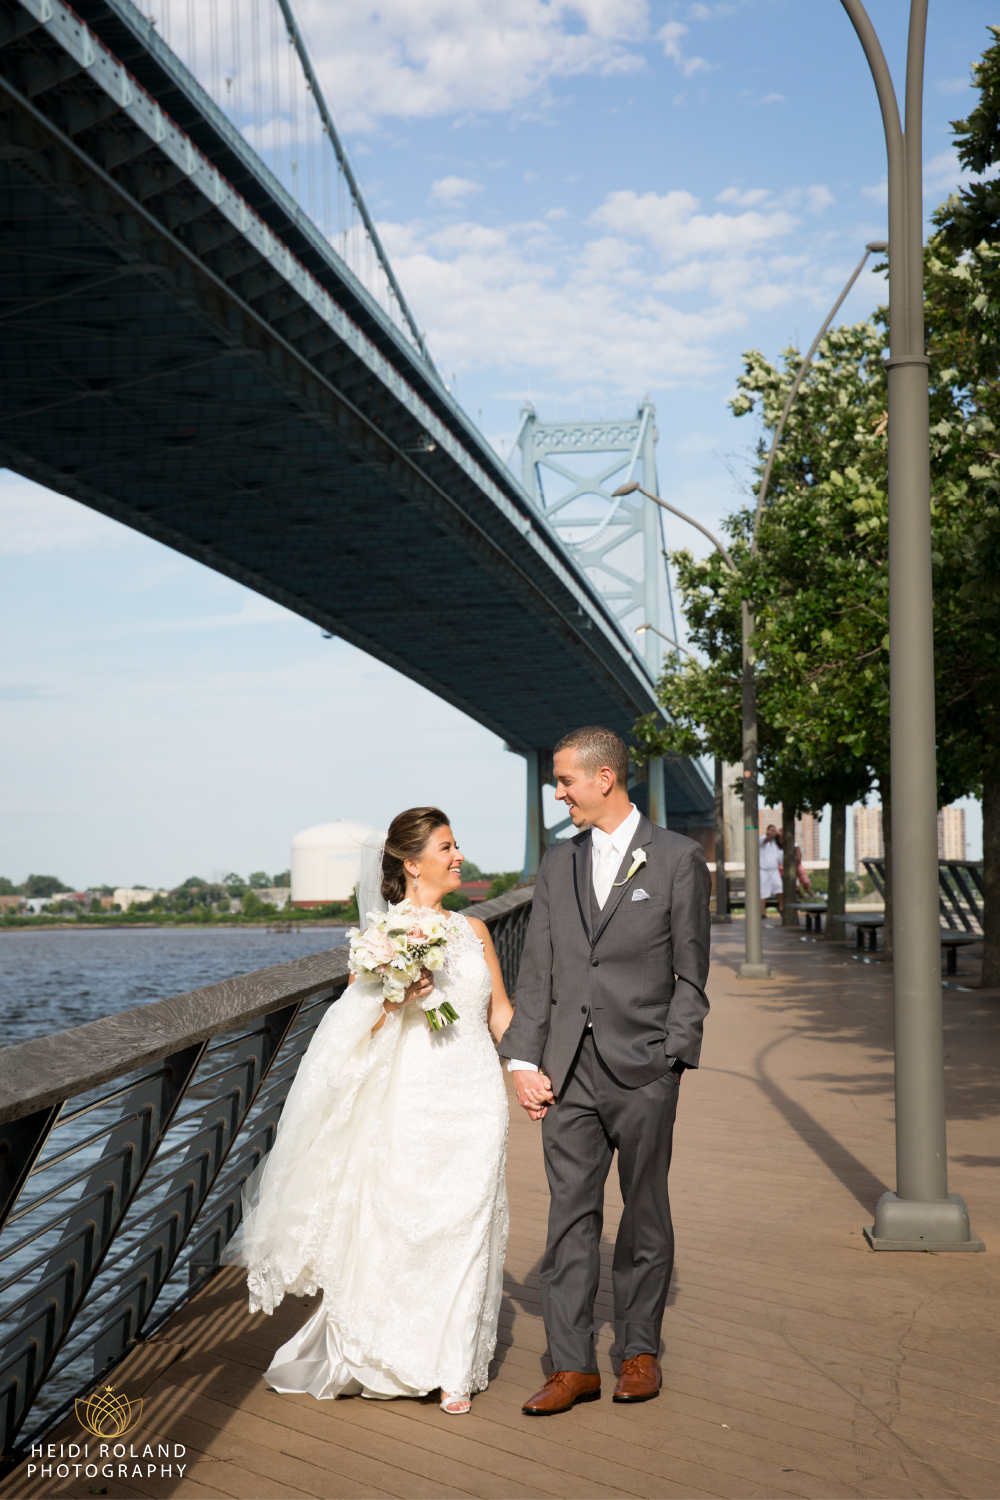 Delaware River waterfront wedding photo bride and groom